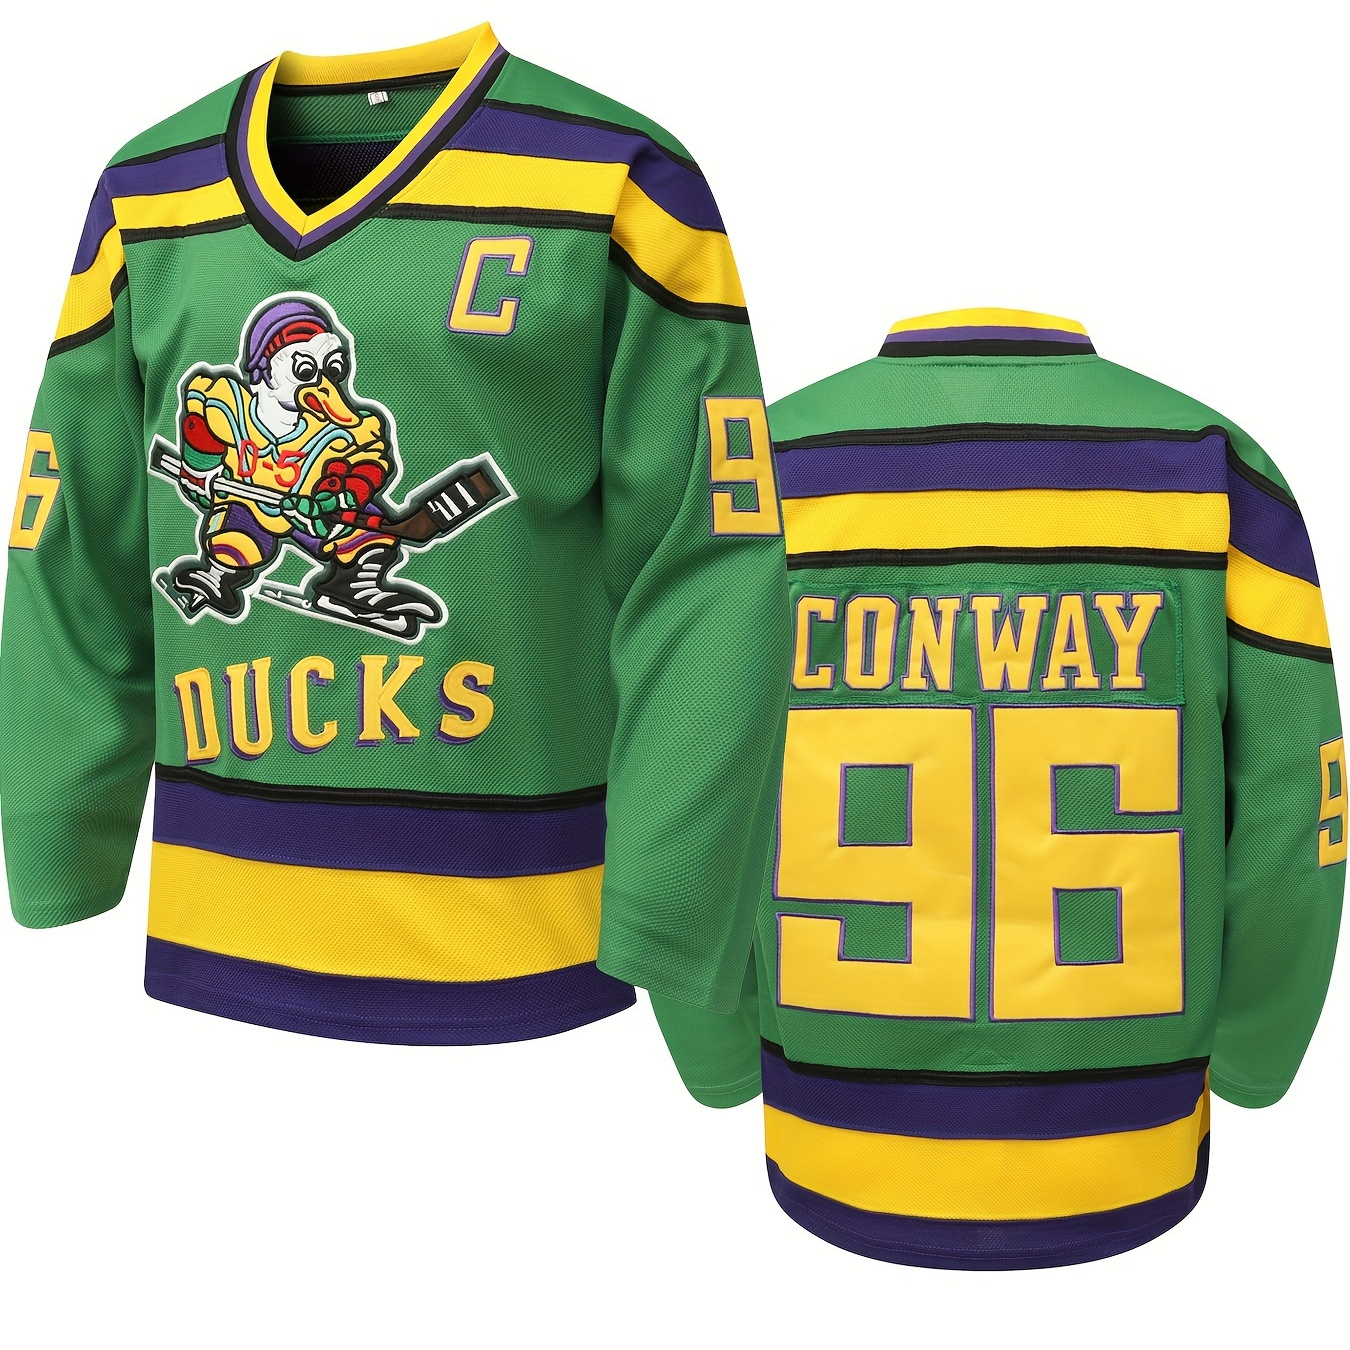 

Men's #96 Long Sleeve Ice Hockey Jersey: Green Retro Classic Embroidery Stitched Hockey Sweatshirt Party Clothing